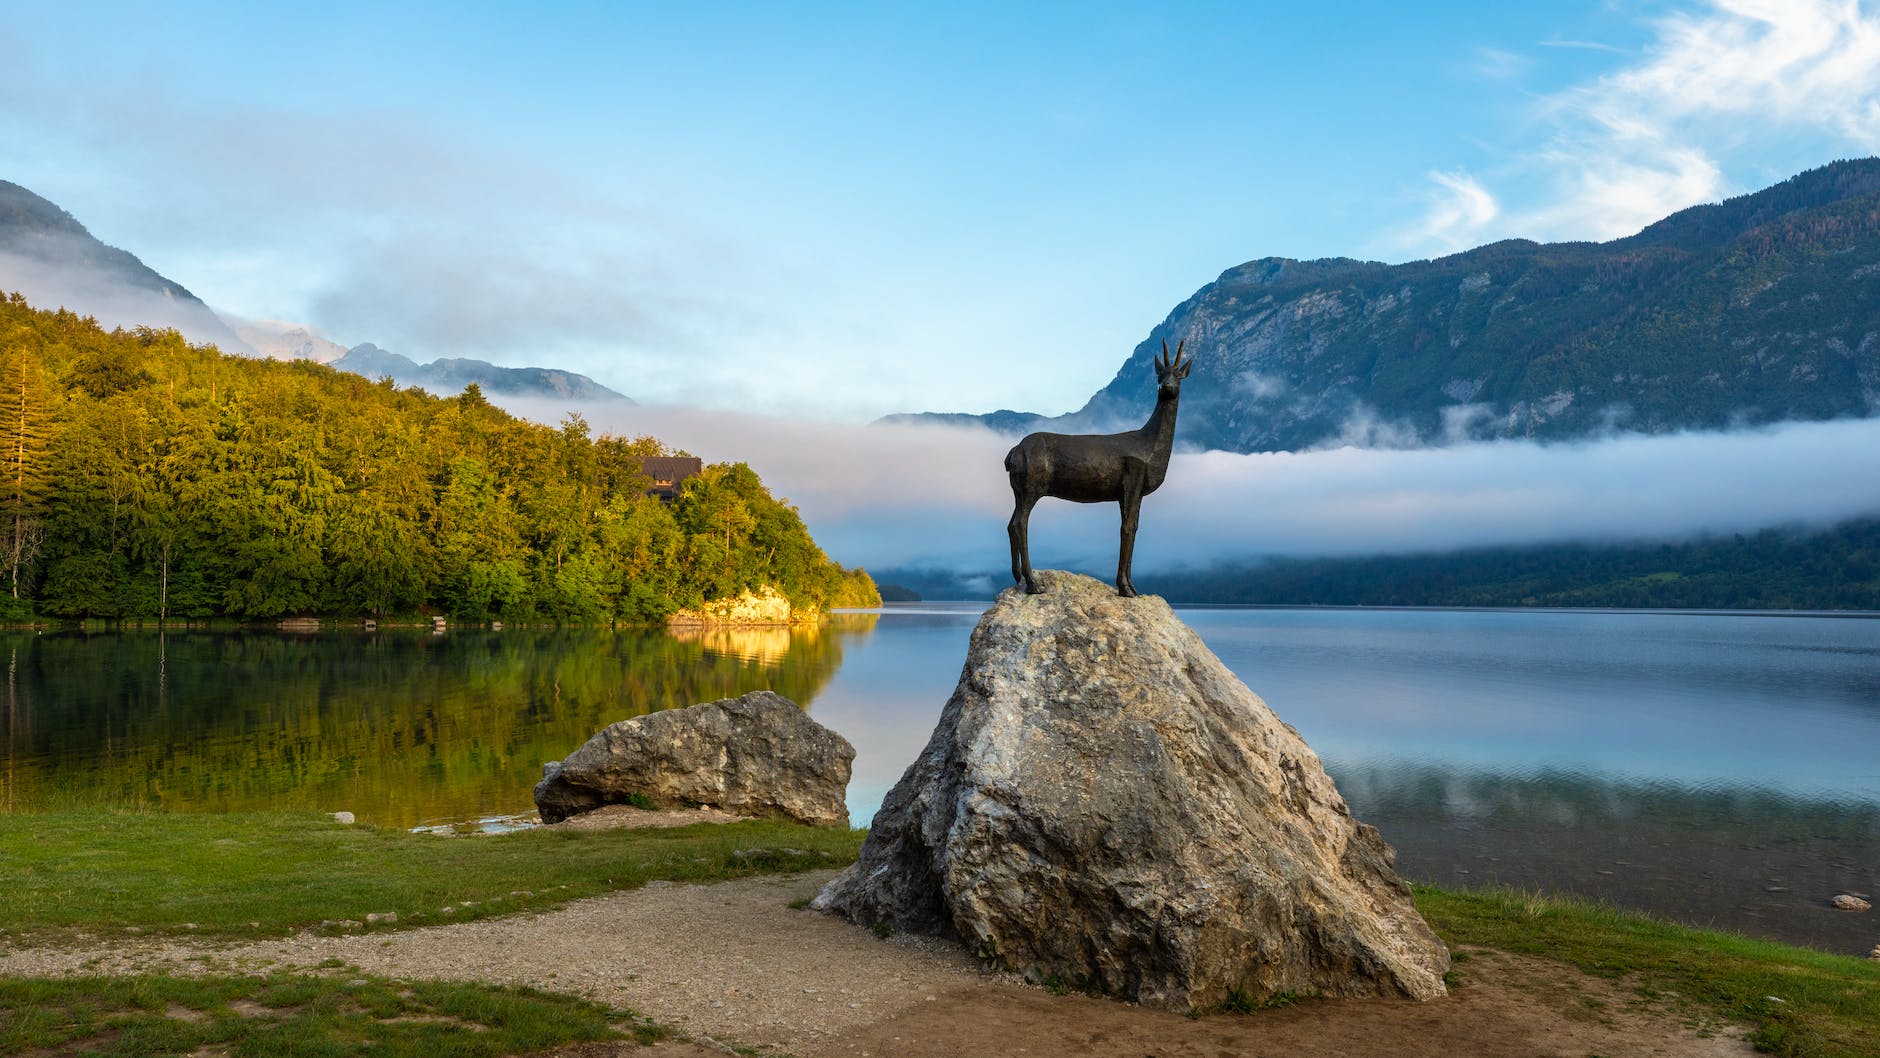 early morning view at lake bohinj in bohinj with the statue of goldhorn zlatorog on the rock